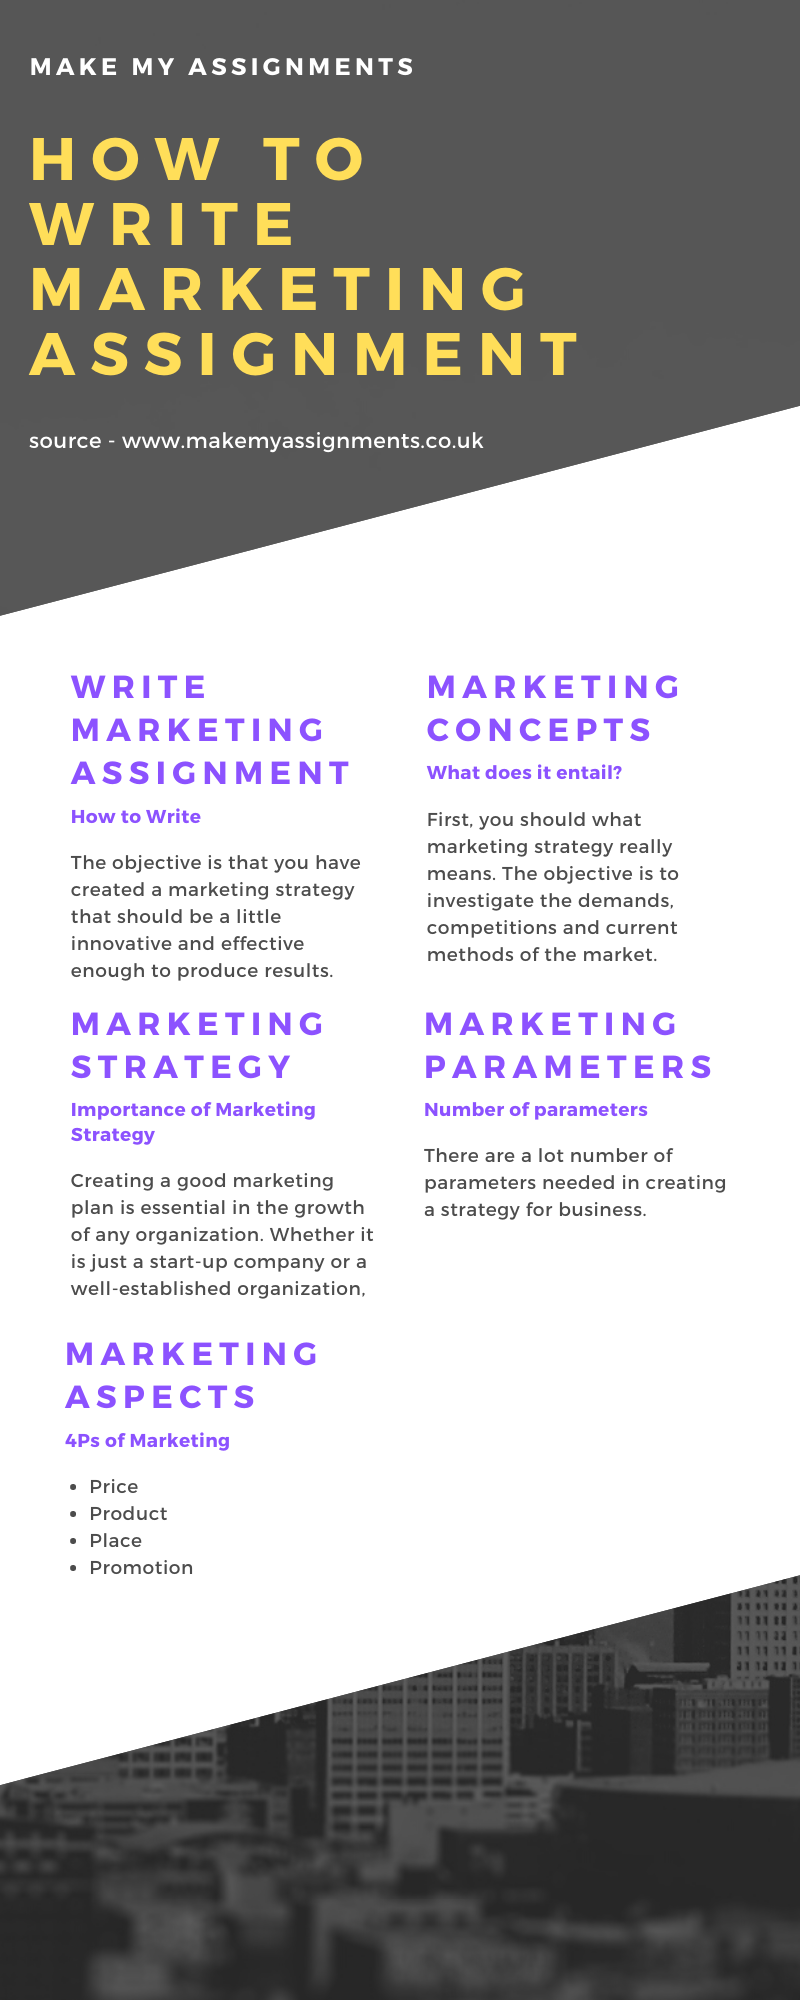 How to Write a Marketing Assignment